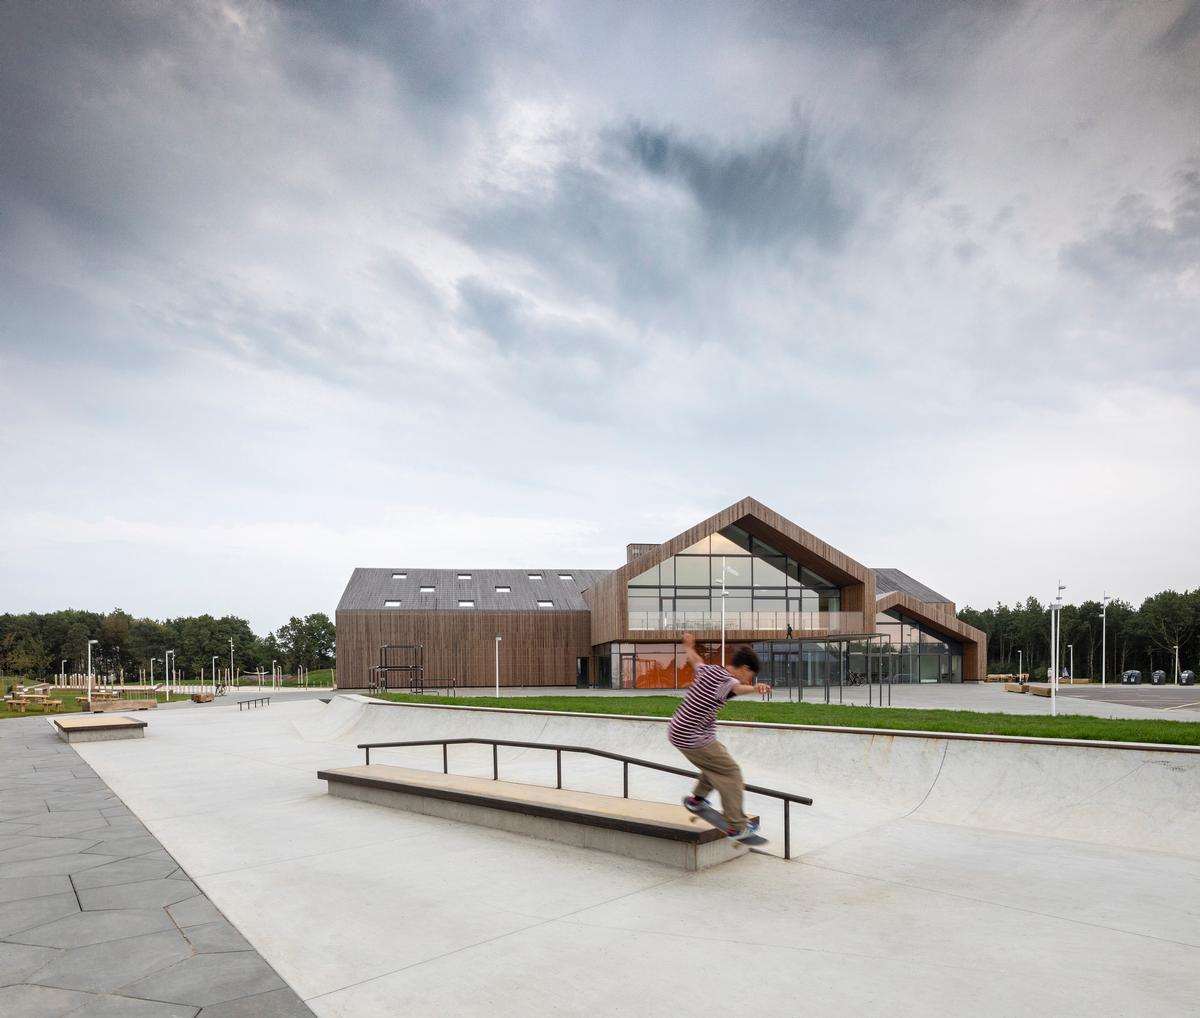 The Heart has state-of-the-art facilities for skateboarders and parkour enthusiasts / Photos by Adam Mørk